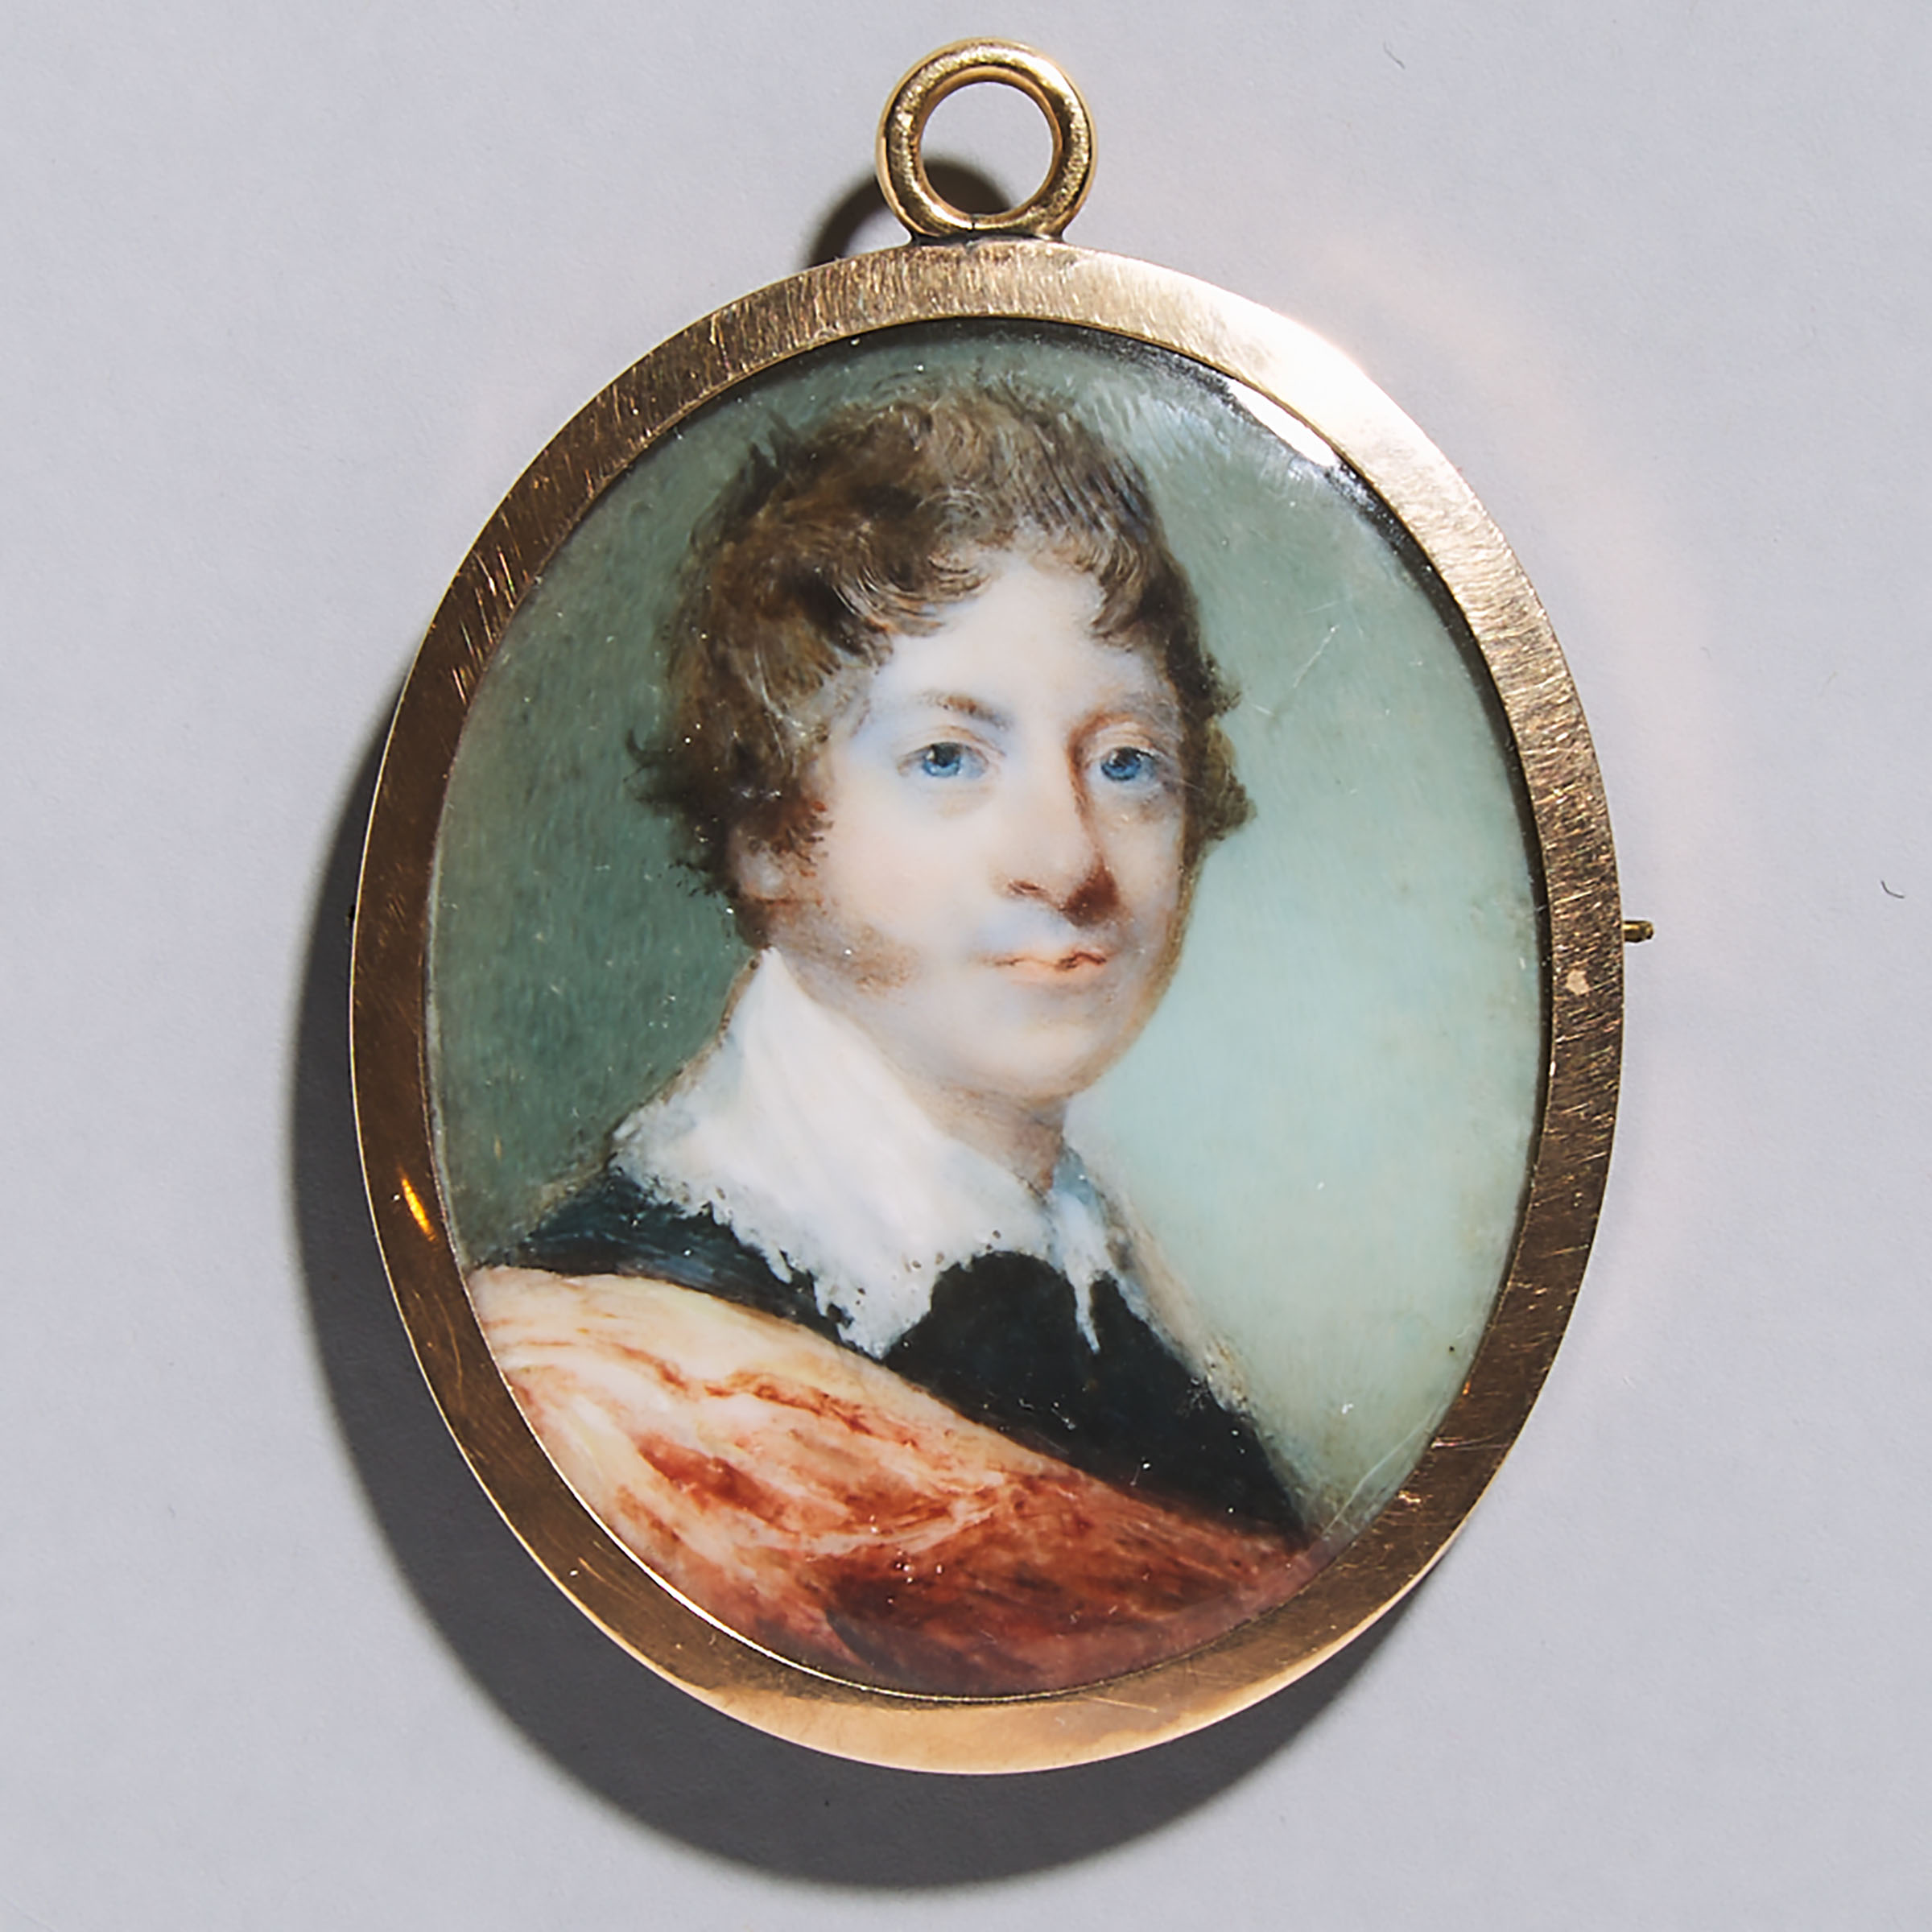 Portrait Miniature of a Gentleman, early 19th century